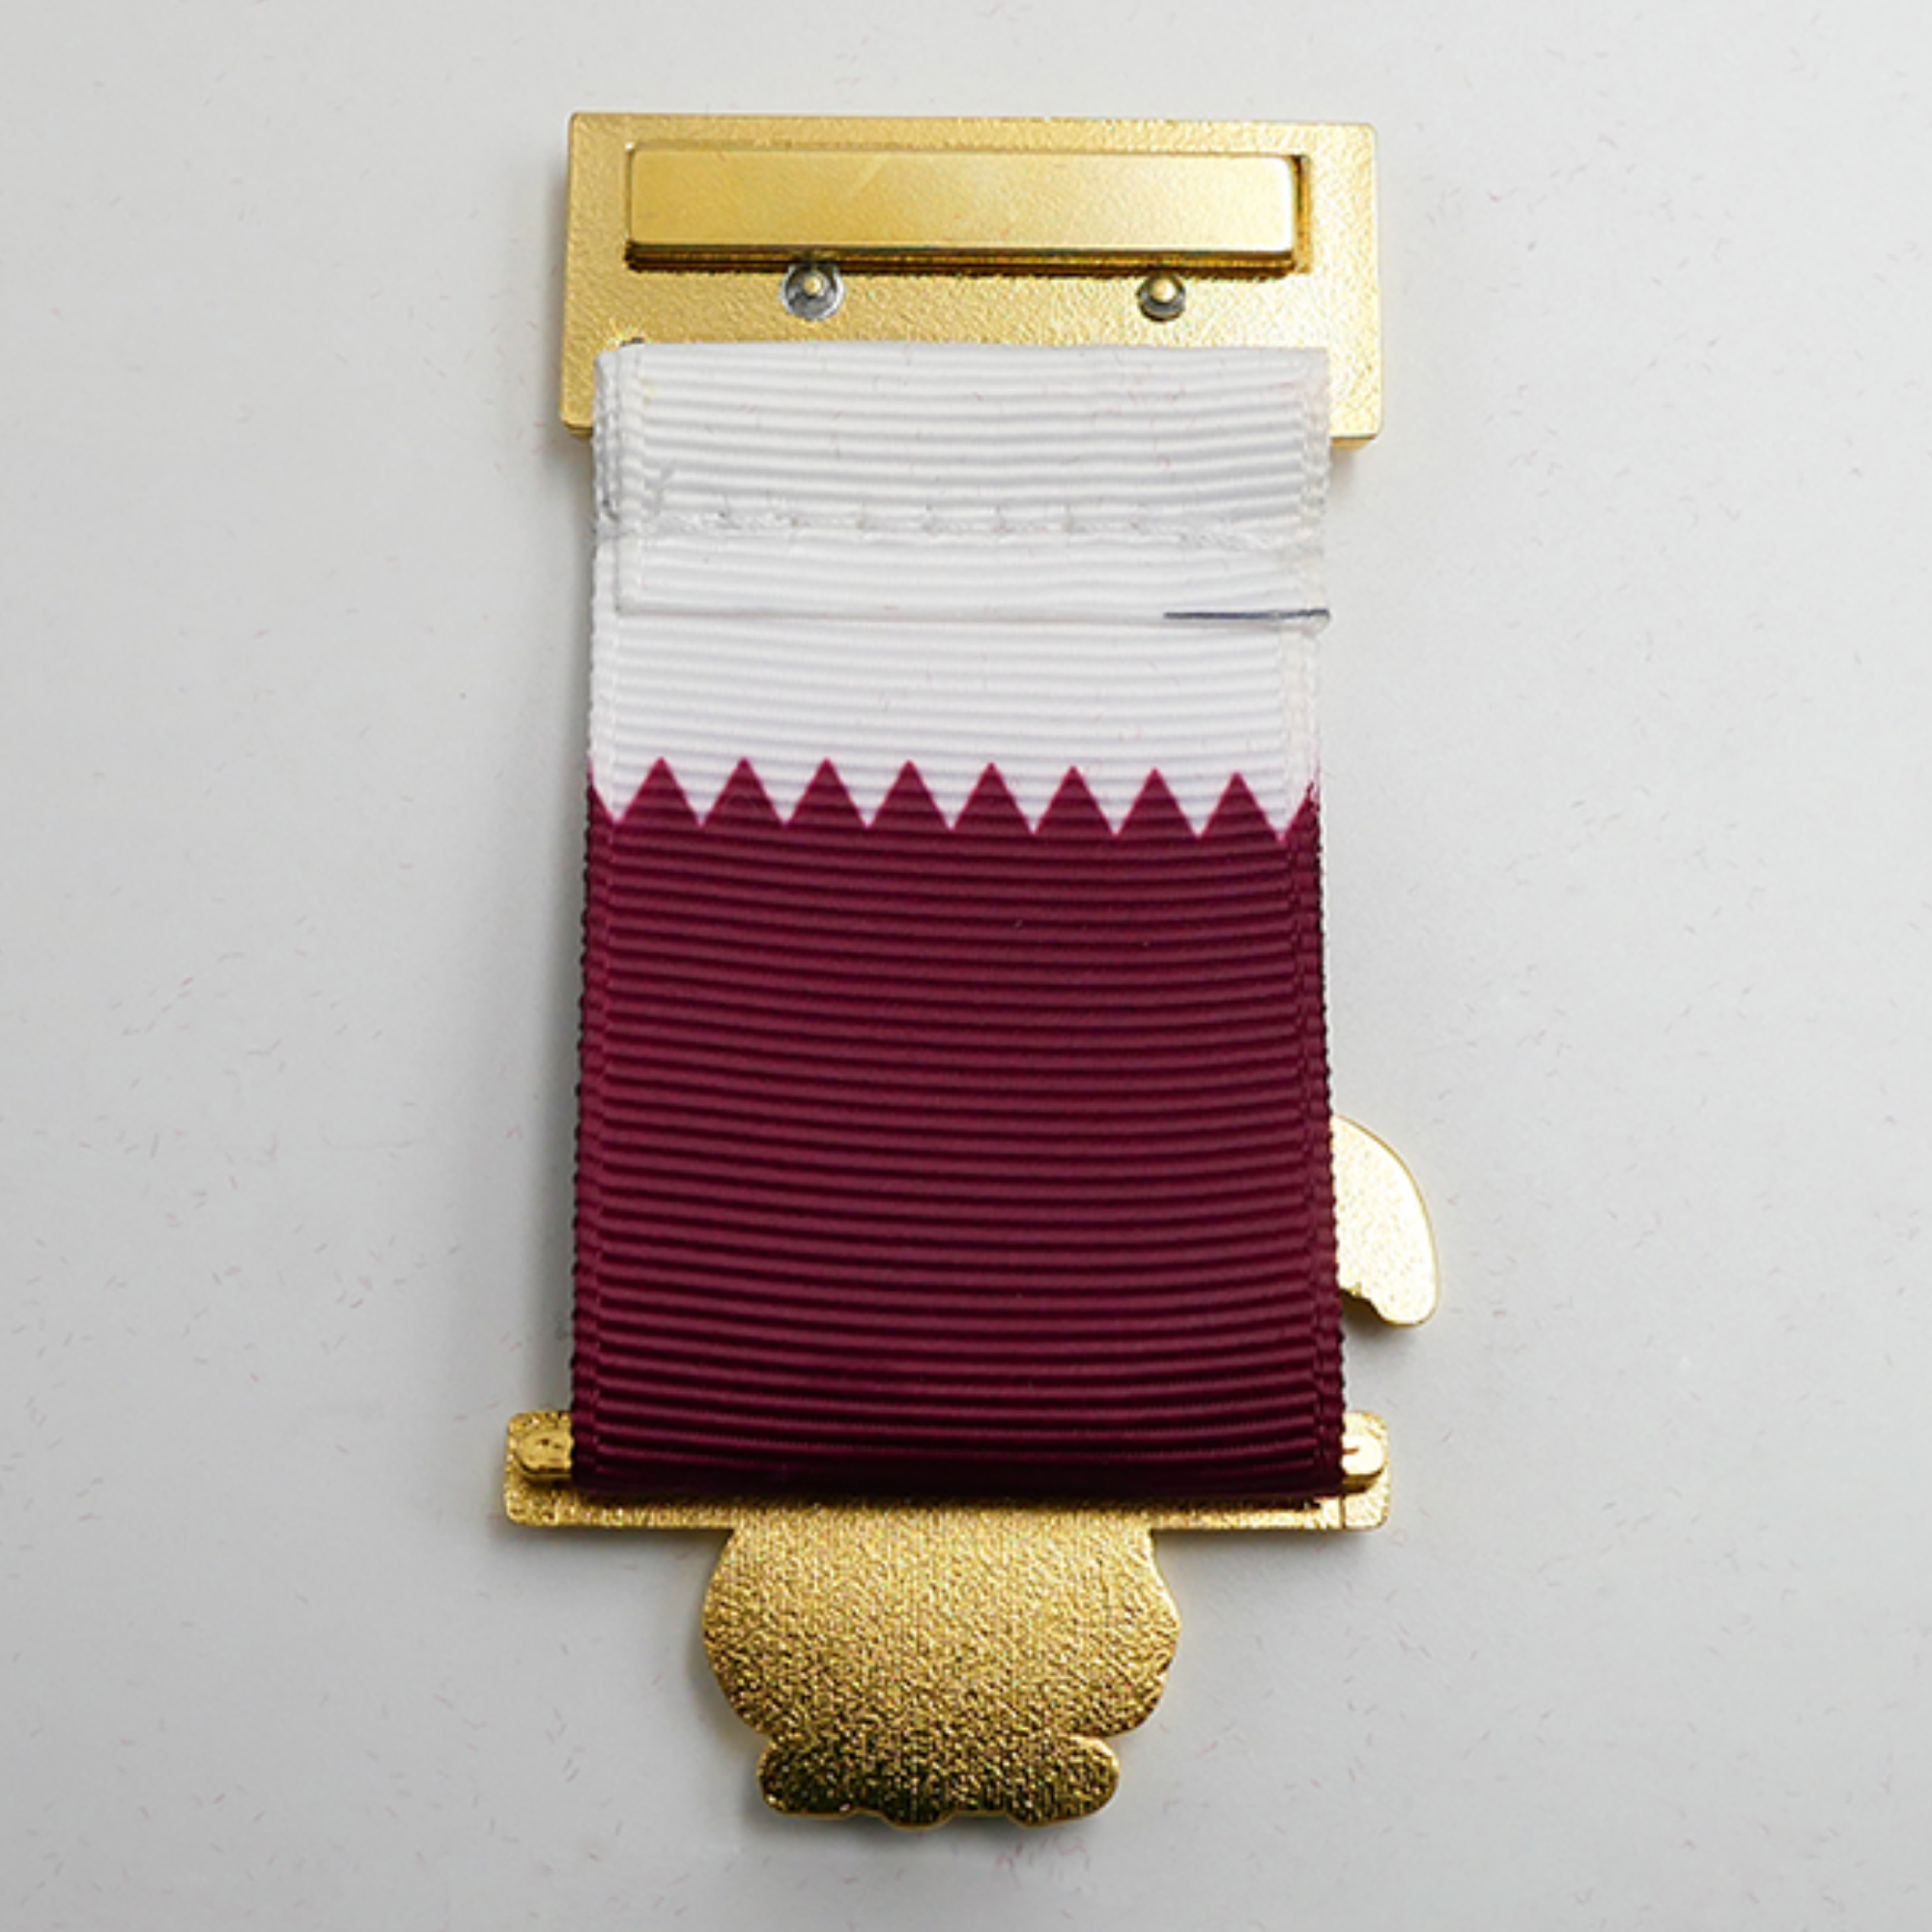 Qatar National Day Lapel Pin badge with magnet